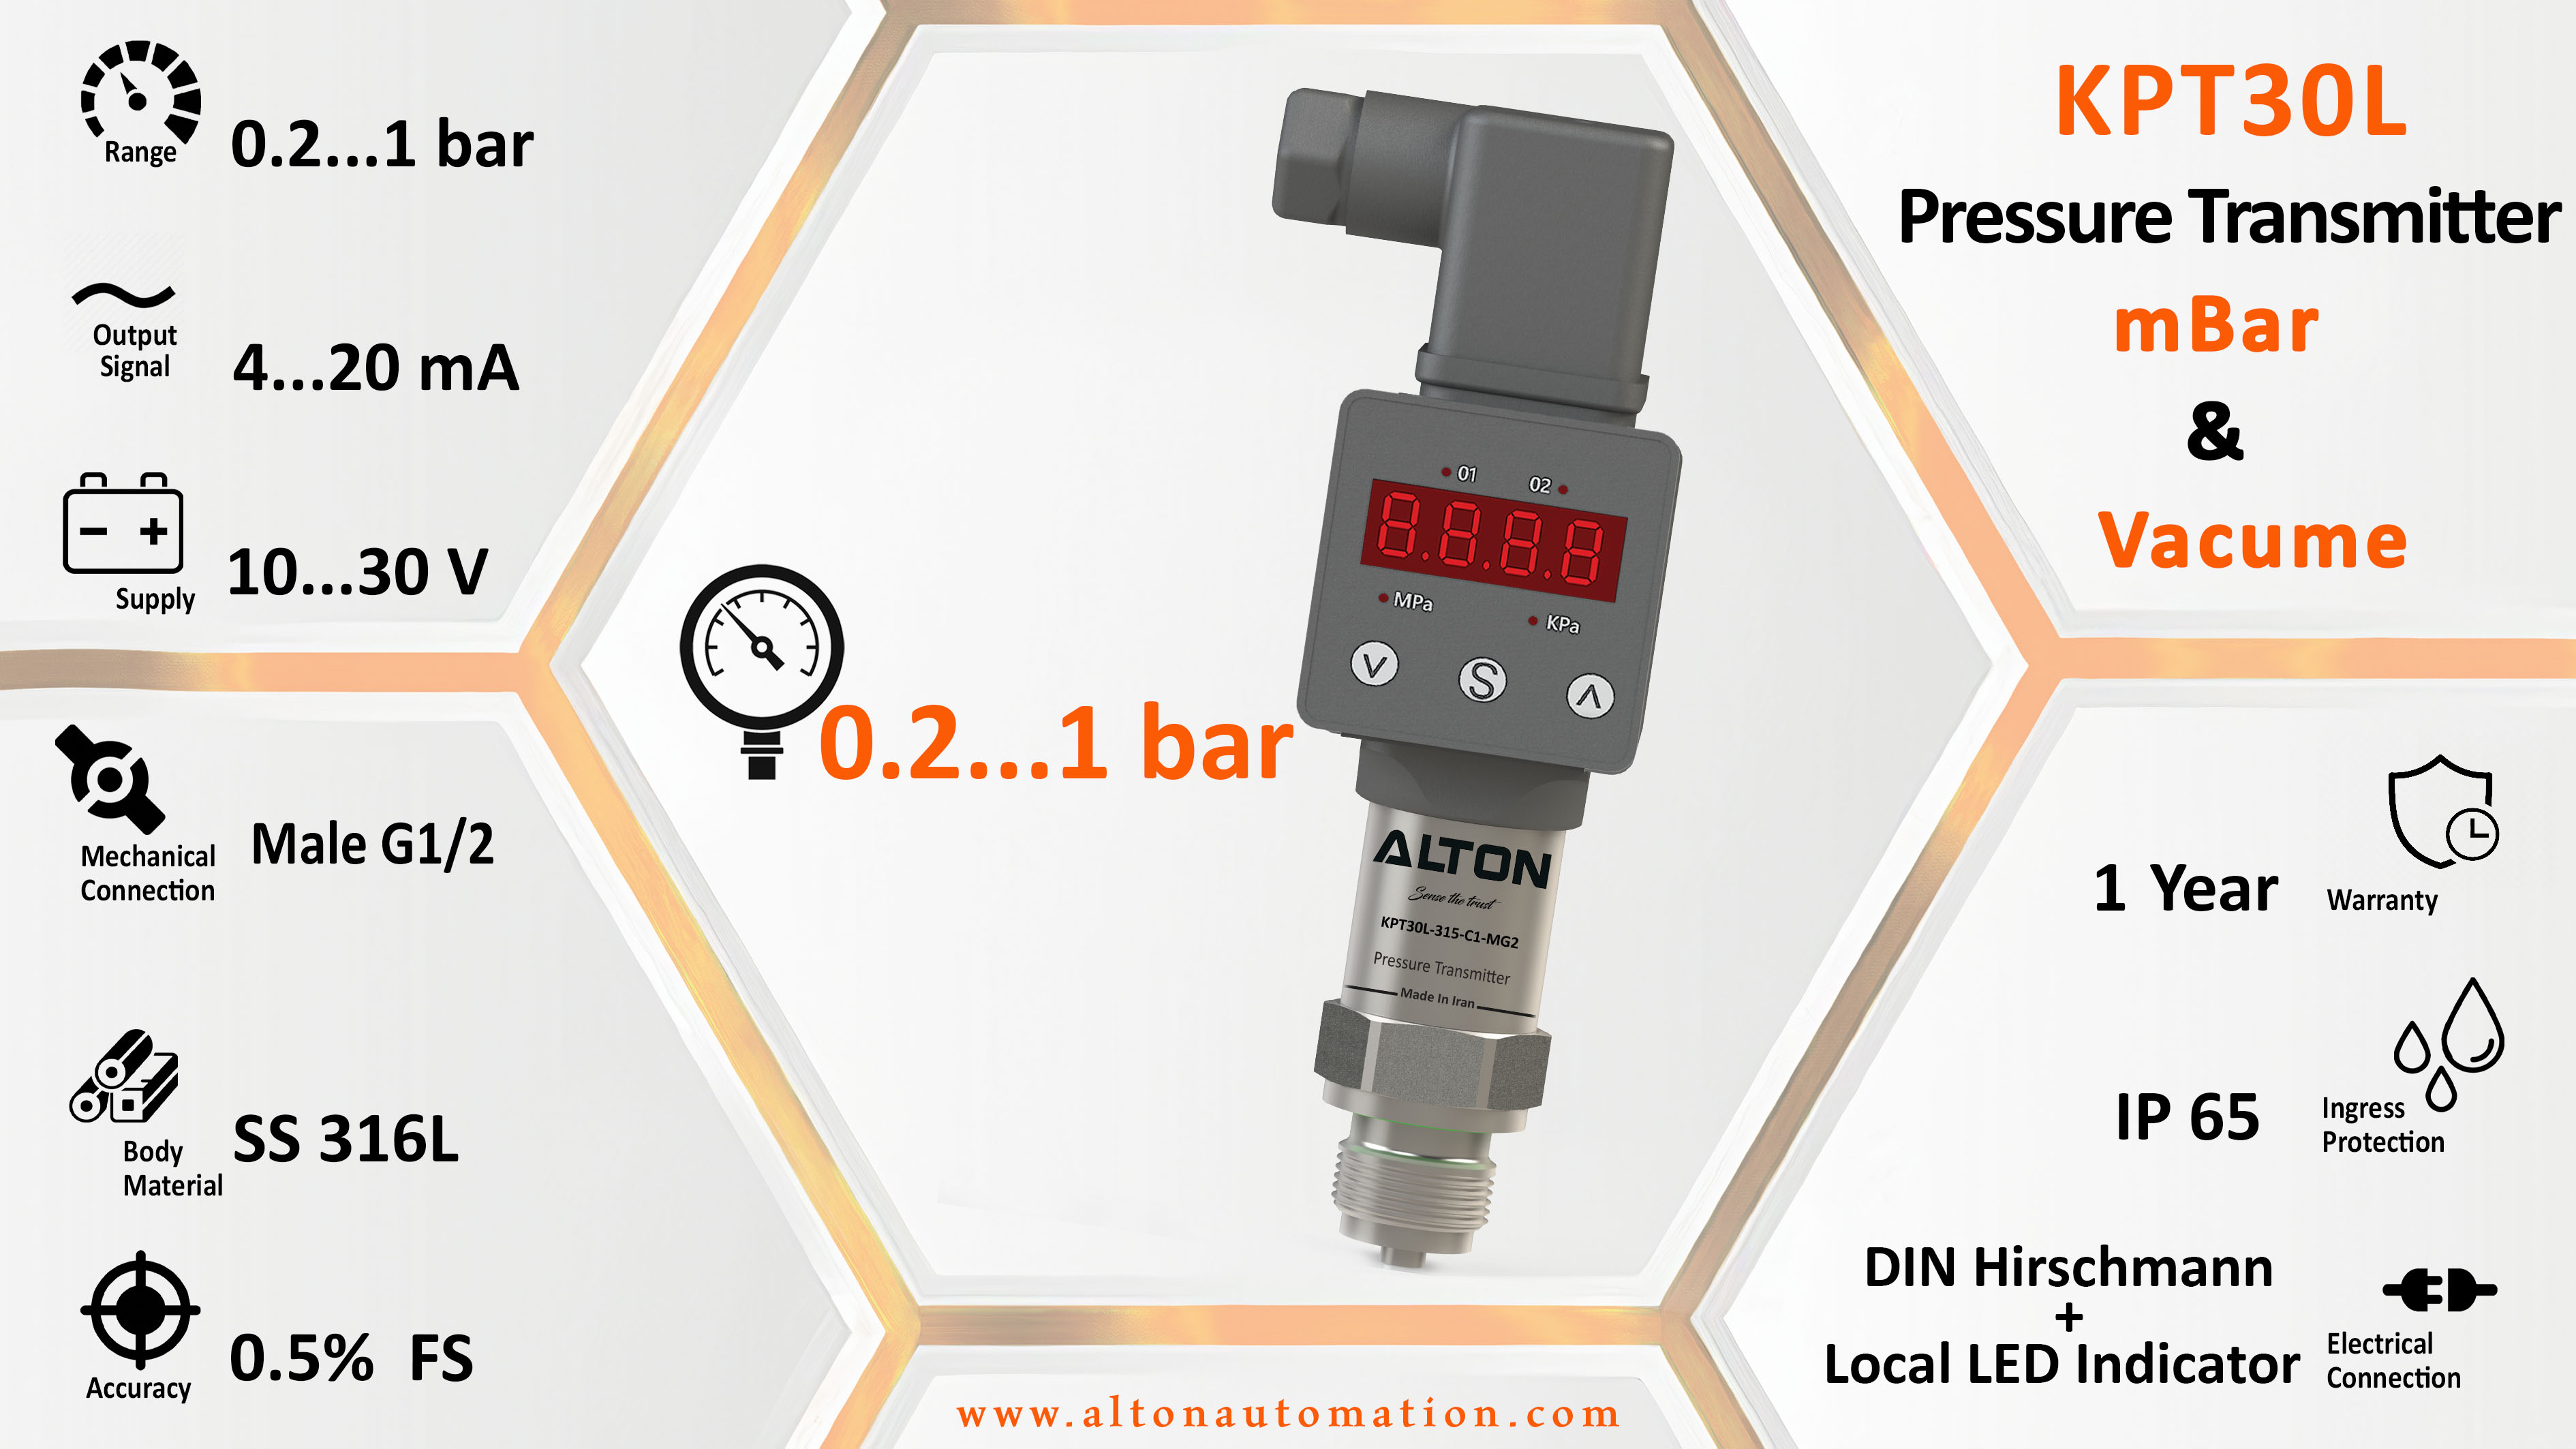 Pressure Transmitter for mbar and vacume-KPT30L-315-C1-MG2